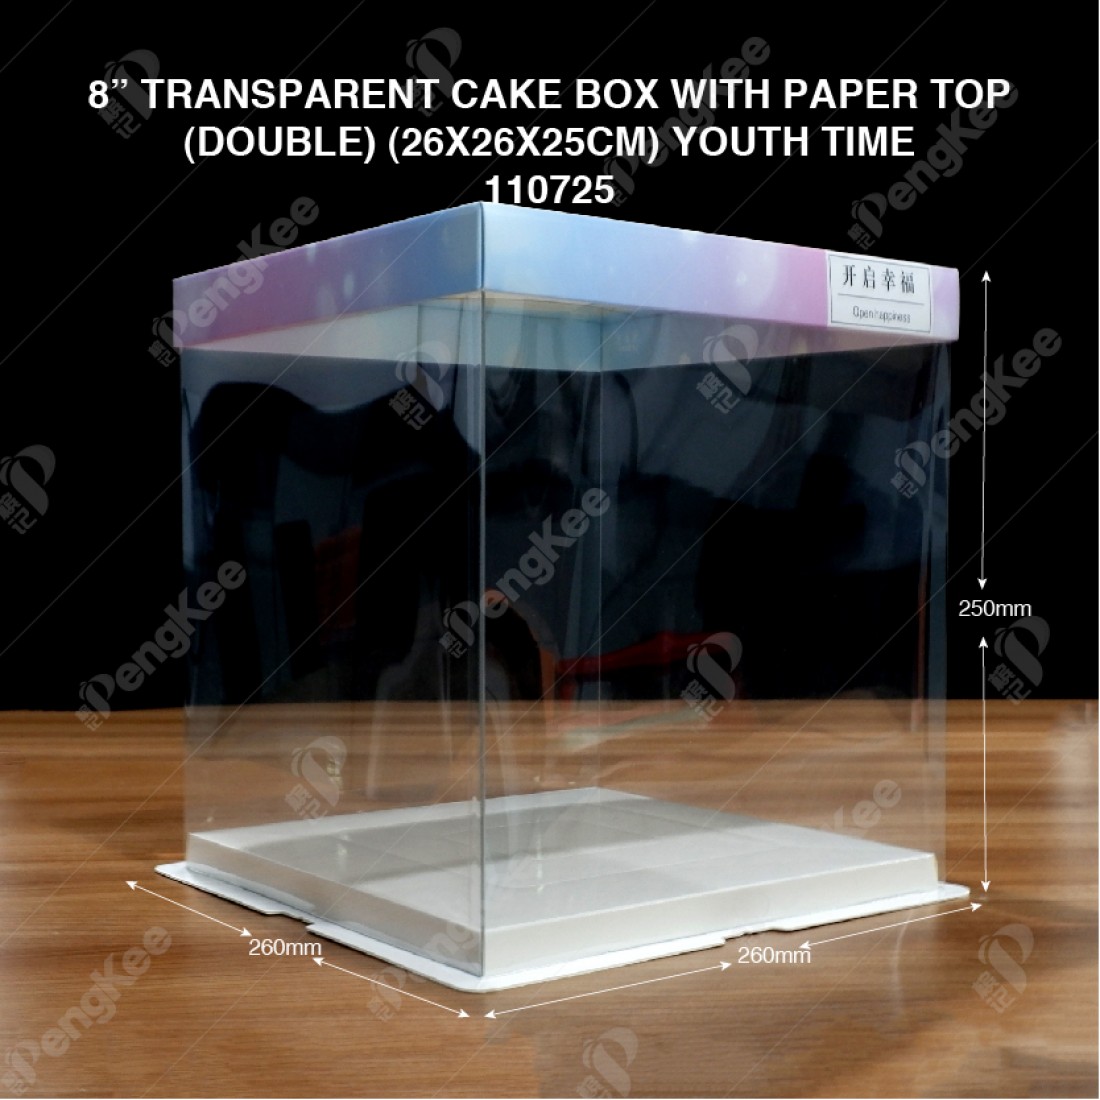 8" TRANSPARENT CAKE BOX WITH PAPER TOP(DOUBLE) (26*26*25CM)- YOUTH TIME